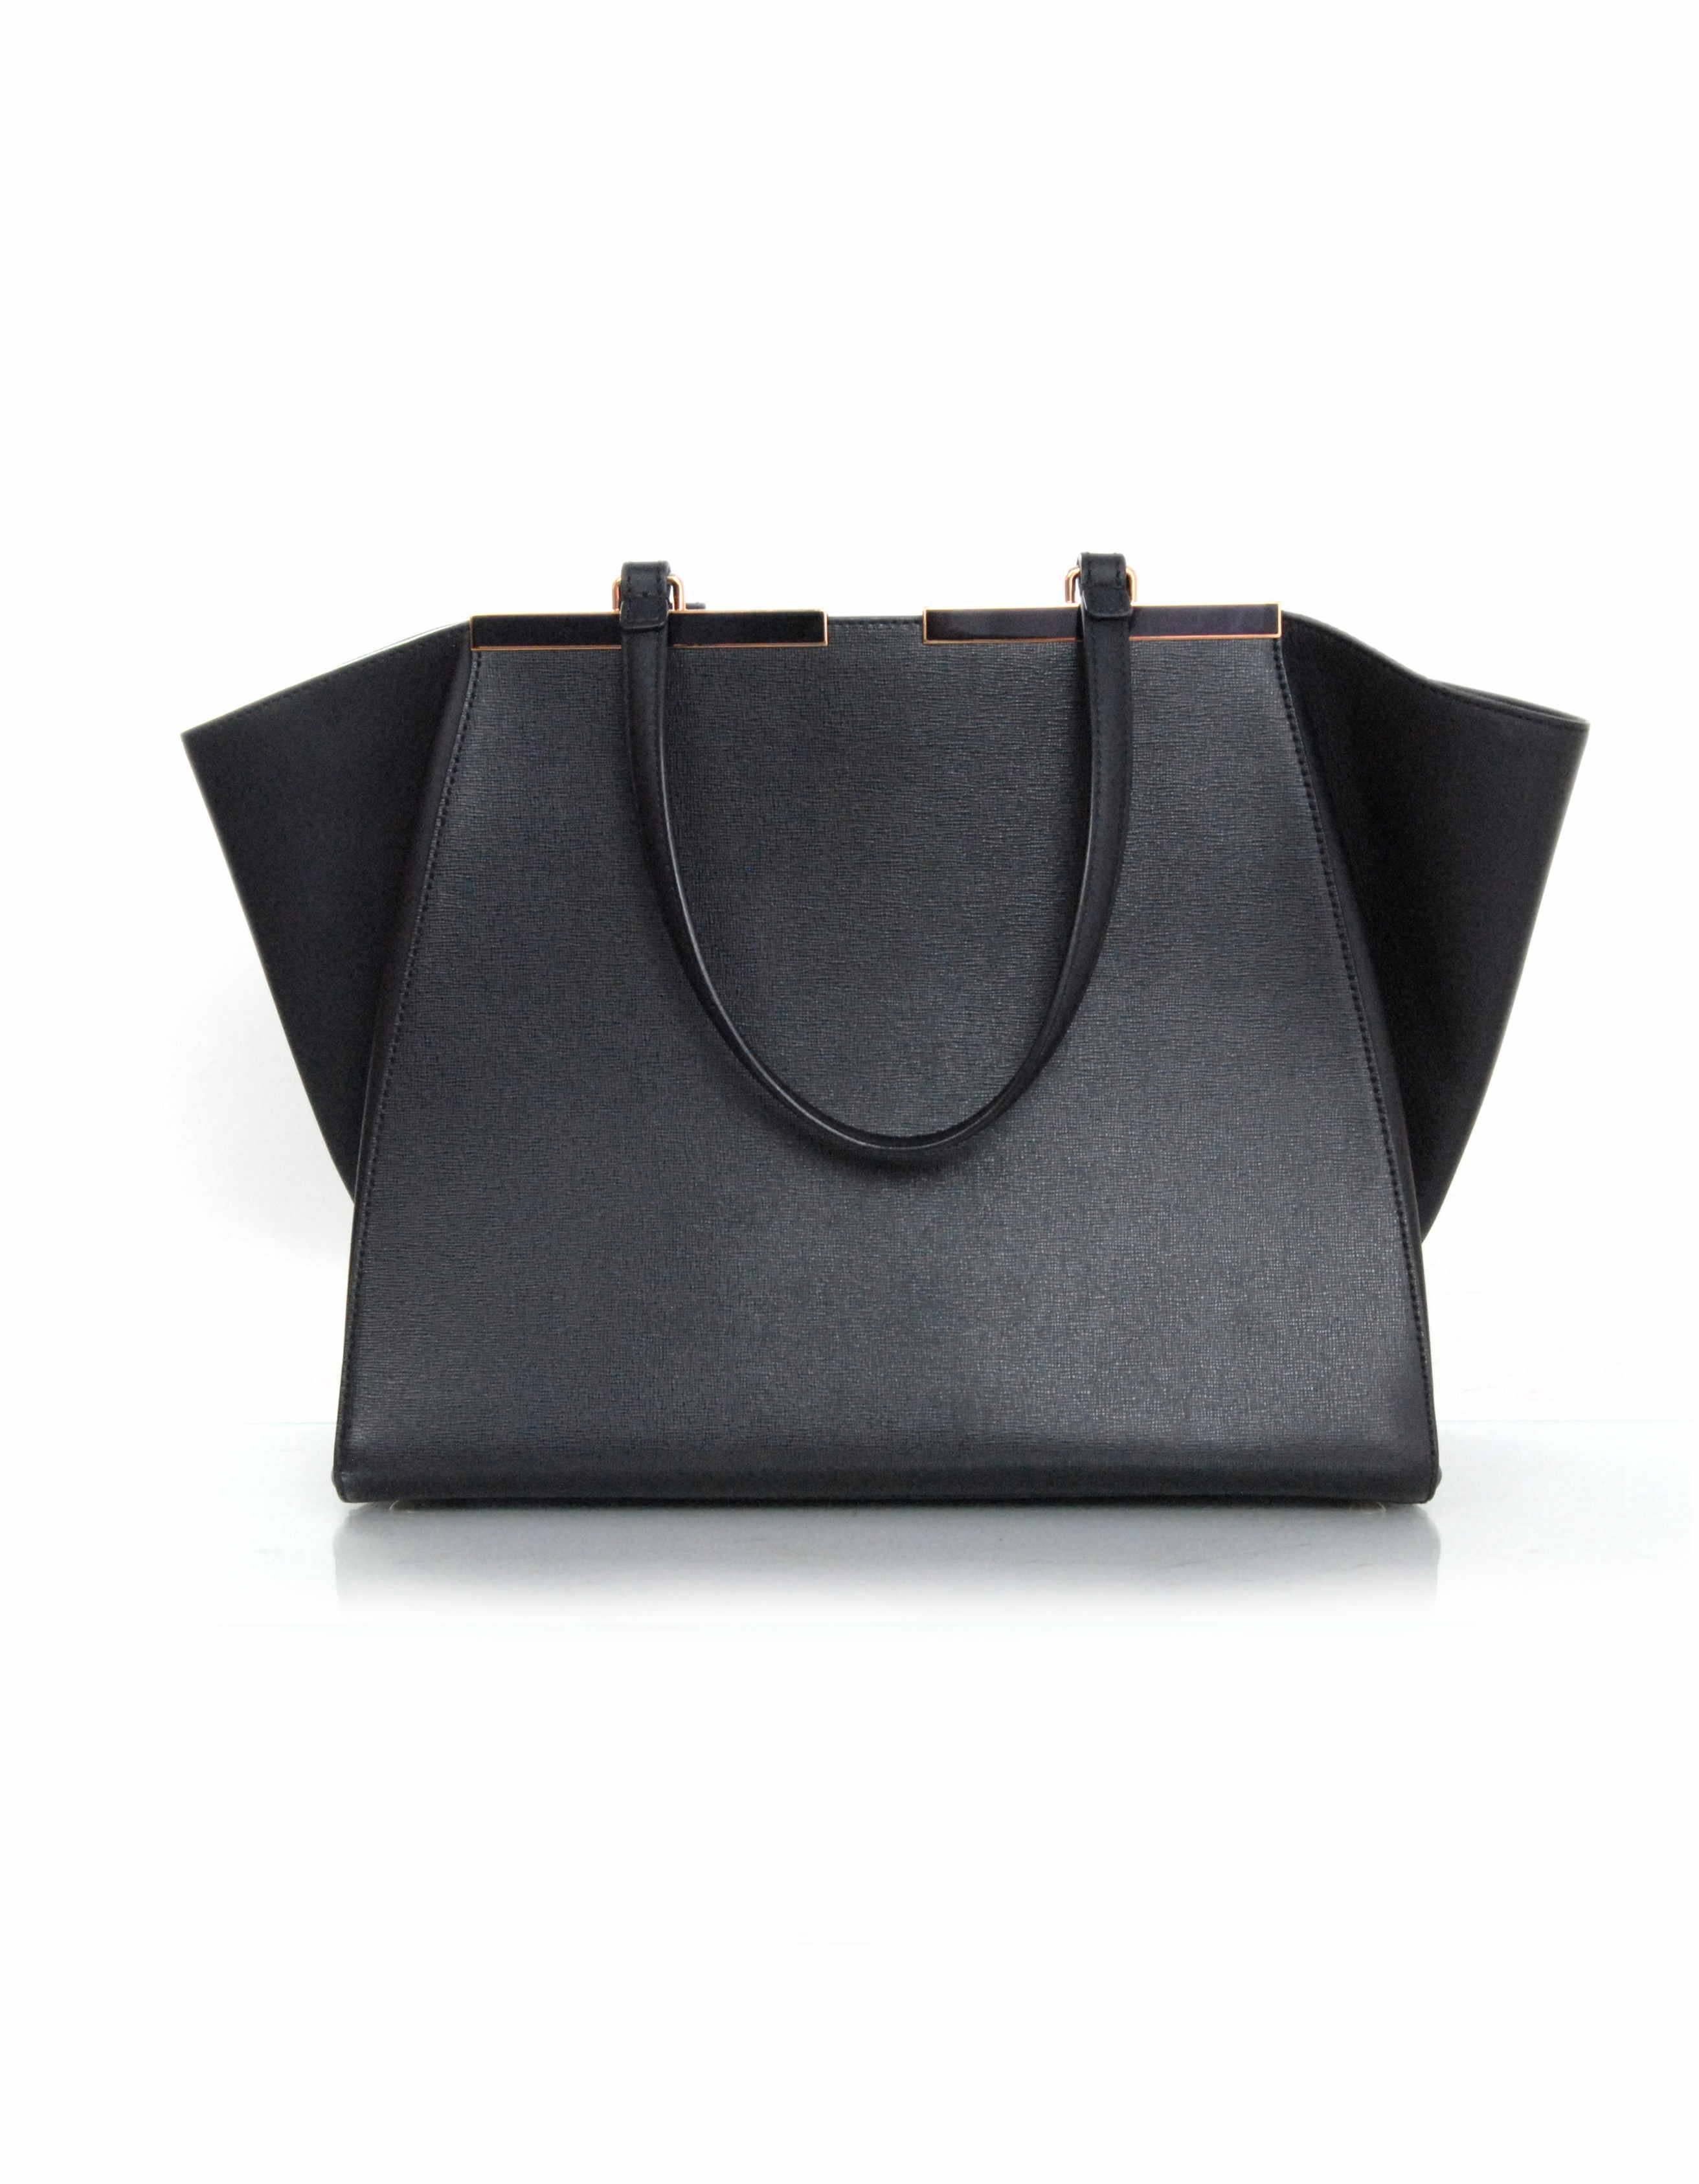 Fendi Black Textured Leather Medium 3Jours Tote Bag rt. $2, 600 In Excellent Condition In New York, NY